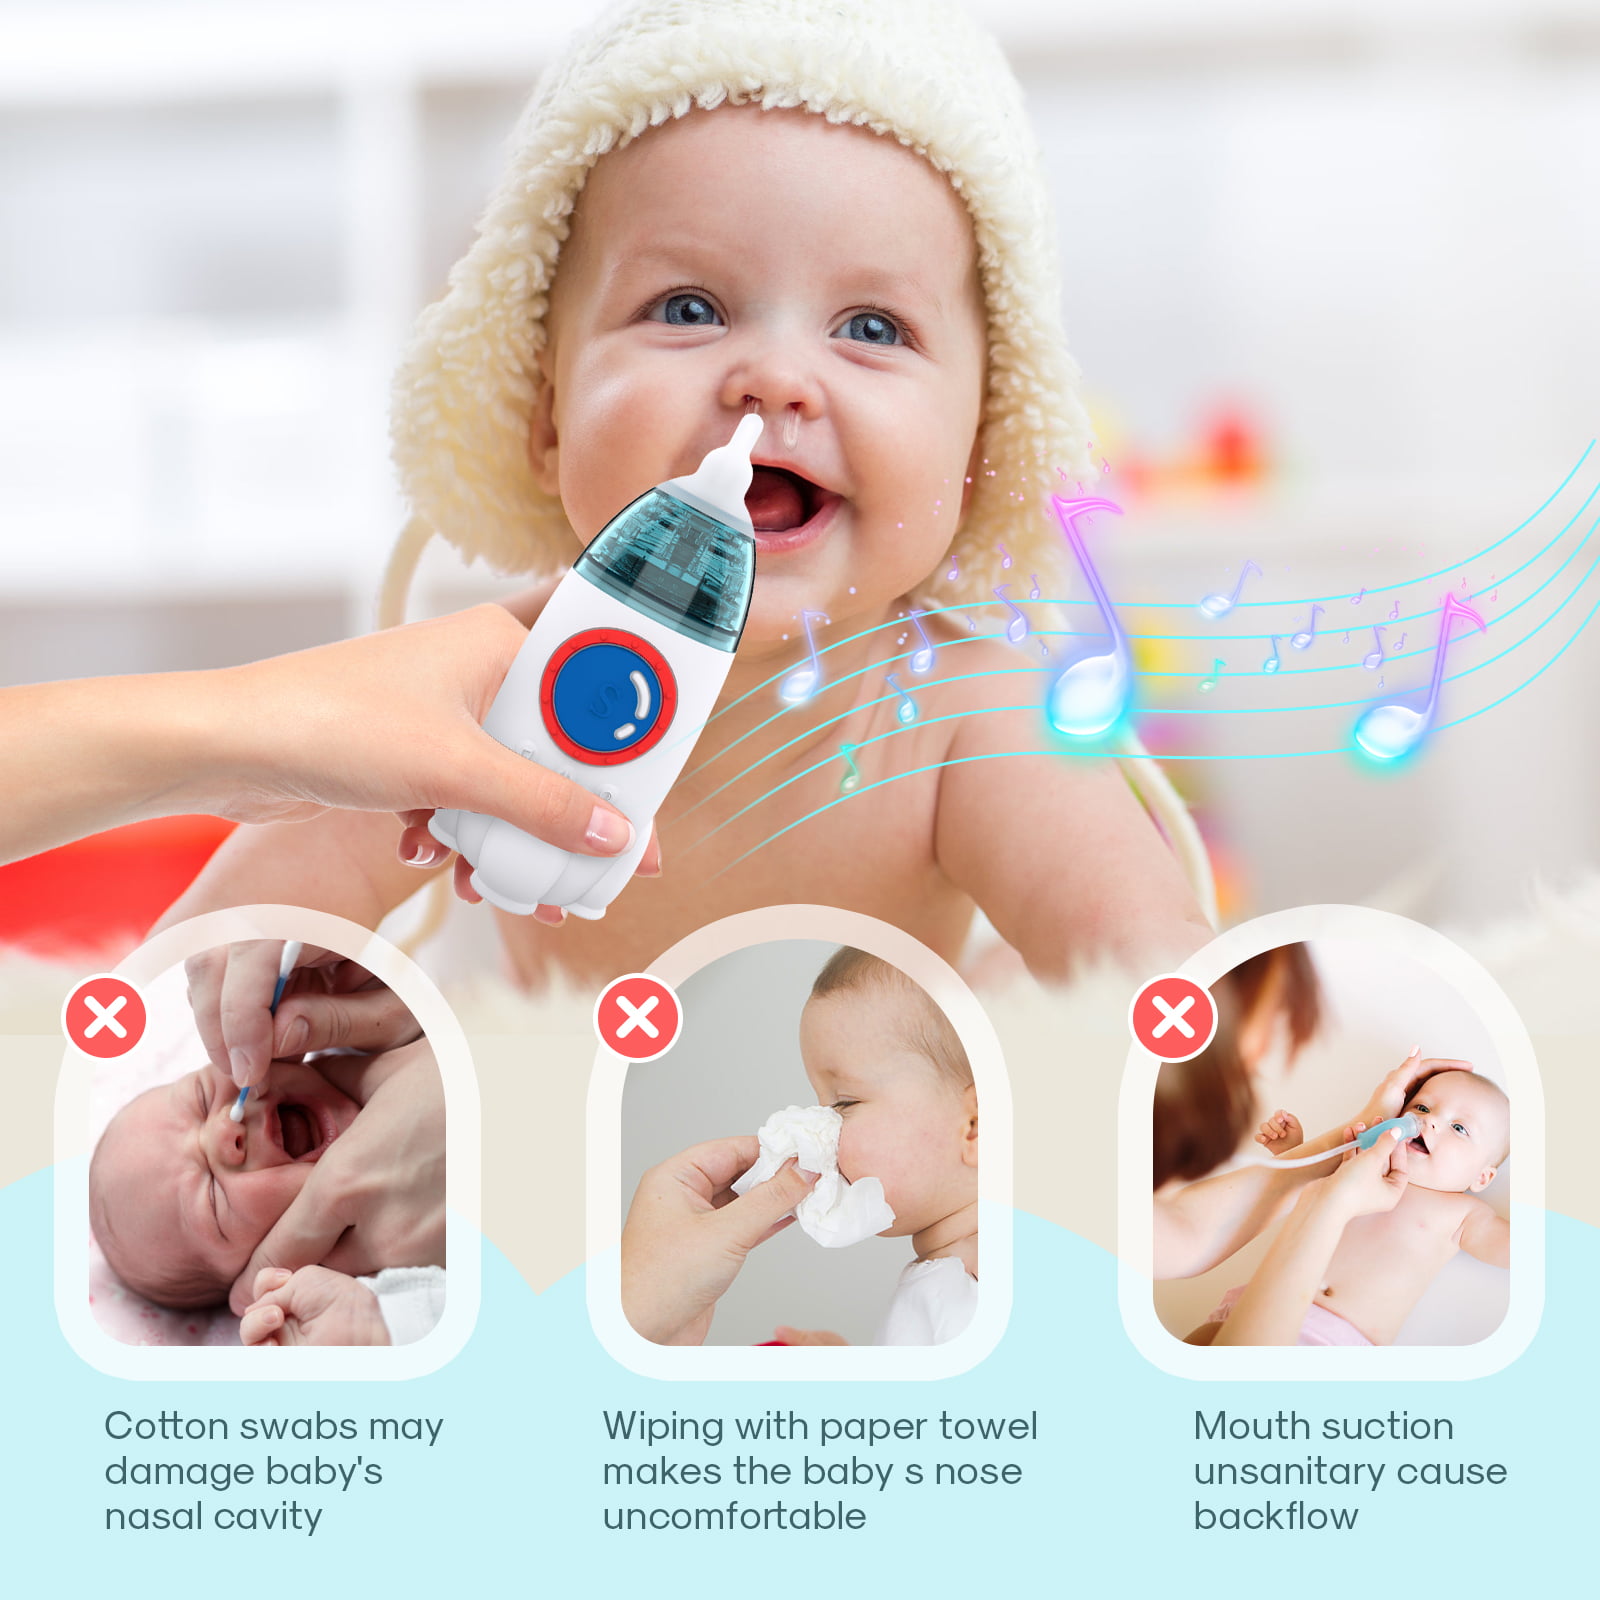 Toddmomy Kids Ear Cleaner Electric Nose Aspirator Handheld Nose Ear Su –  BABACLICK